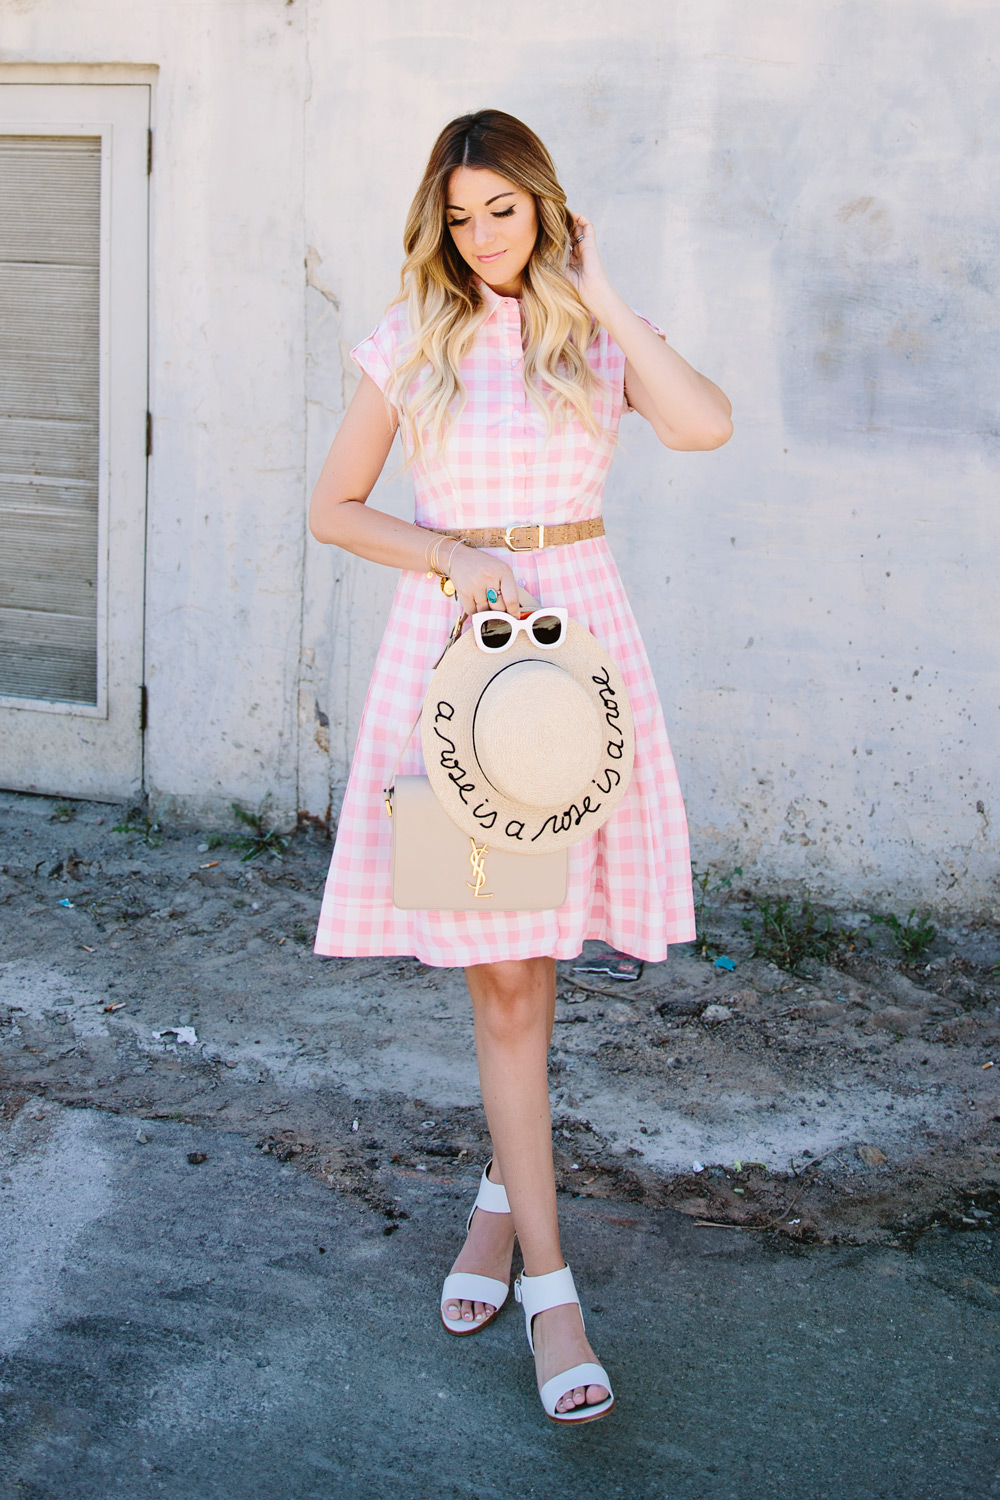 Dash of Darling styles an Eliza J gingham pink checkered poplin dress from Nordstrom with an Eugenia Kim straw boater hat, white Joie sandals and white Celine sunglasses for the perfect summer outfit.